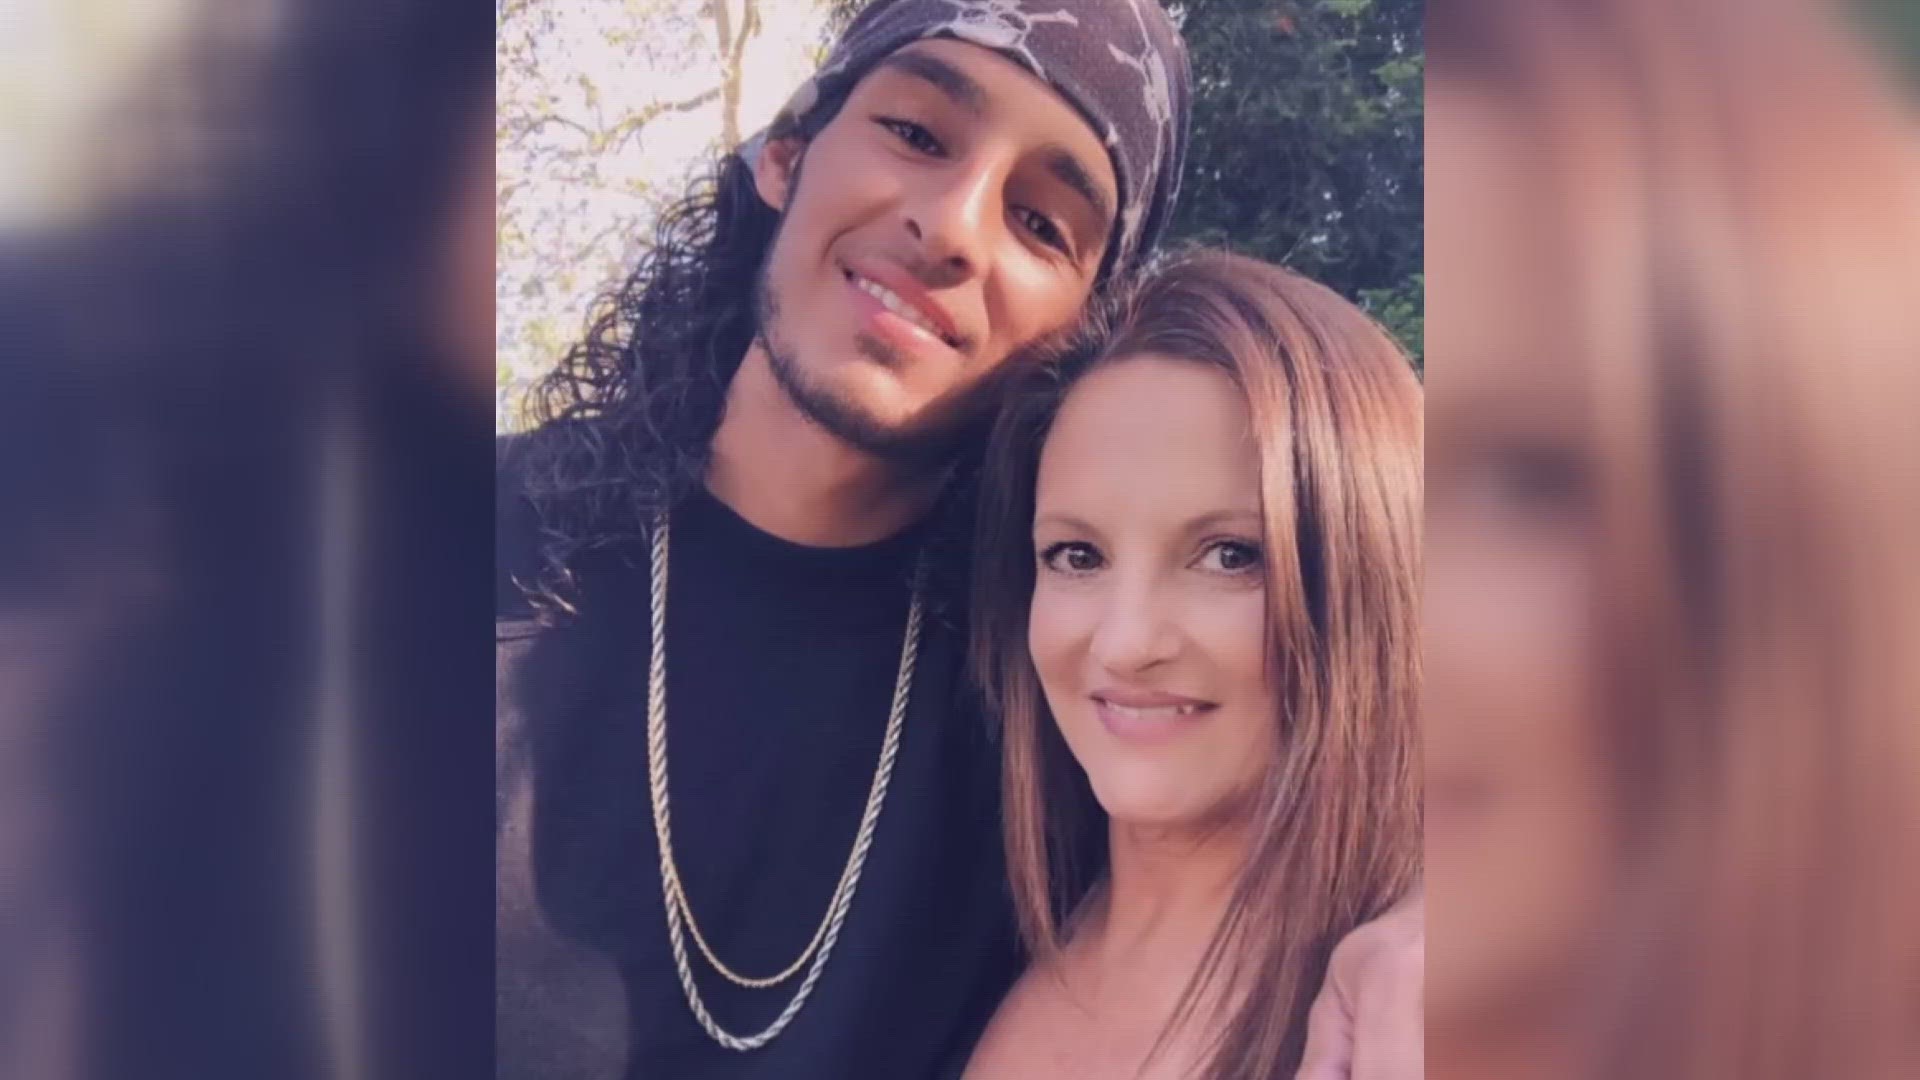 The family says Johnny and another family member were helping their cousin Isaiah “Zay” Vazquez move into a south Sacramento home when they were shot at.